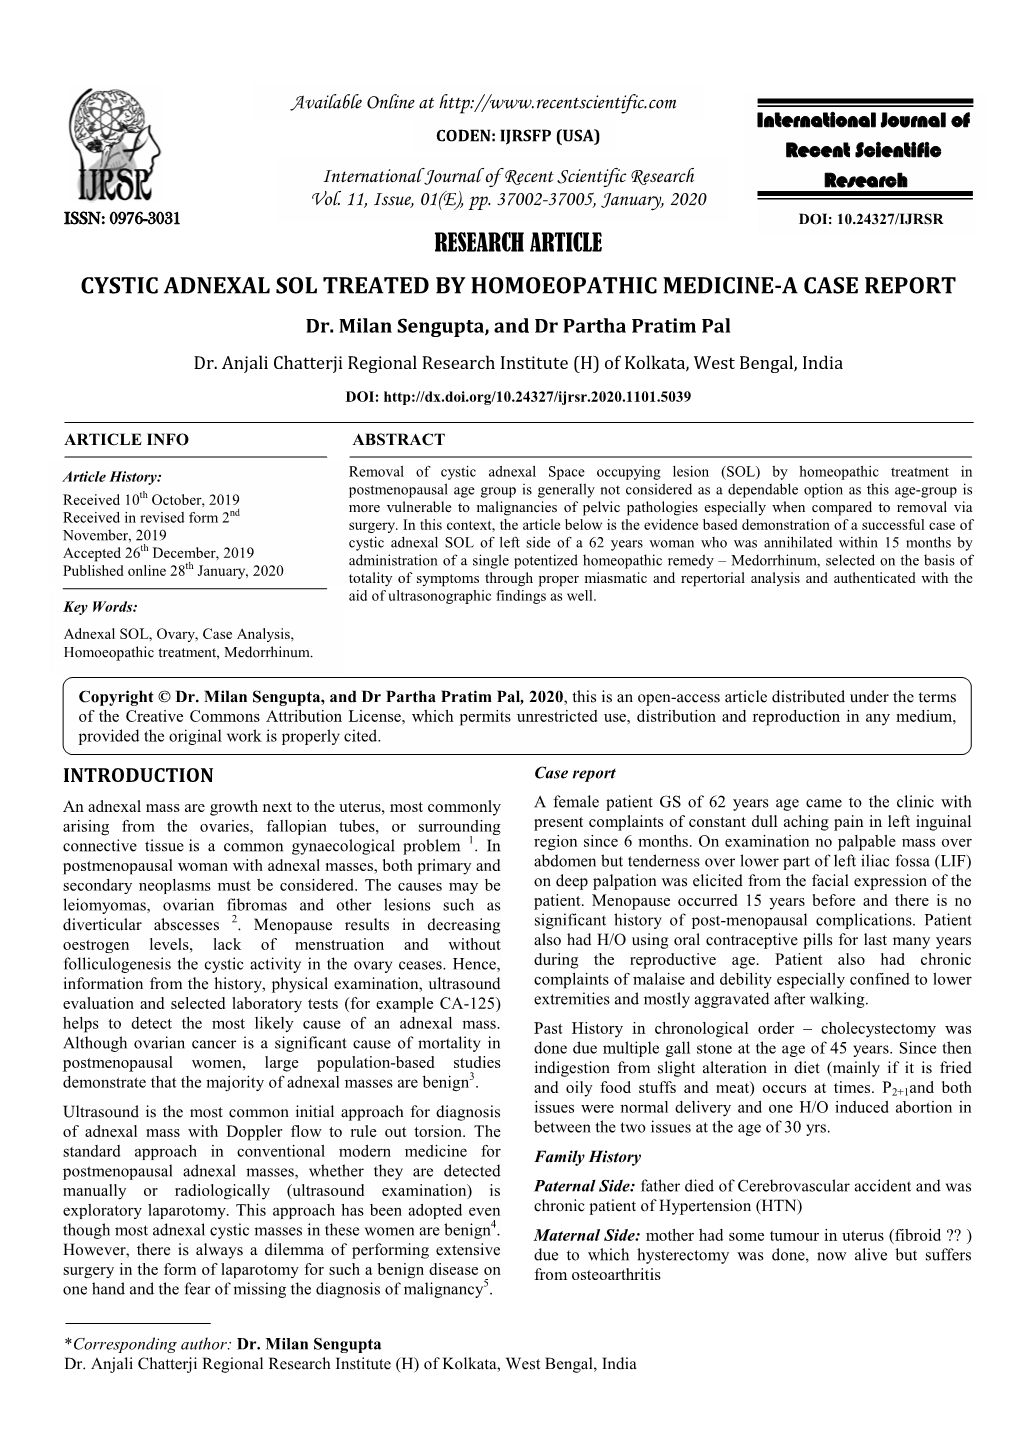 Research Article Cystic Adnexal Sol Treated By